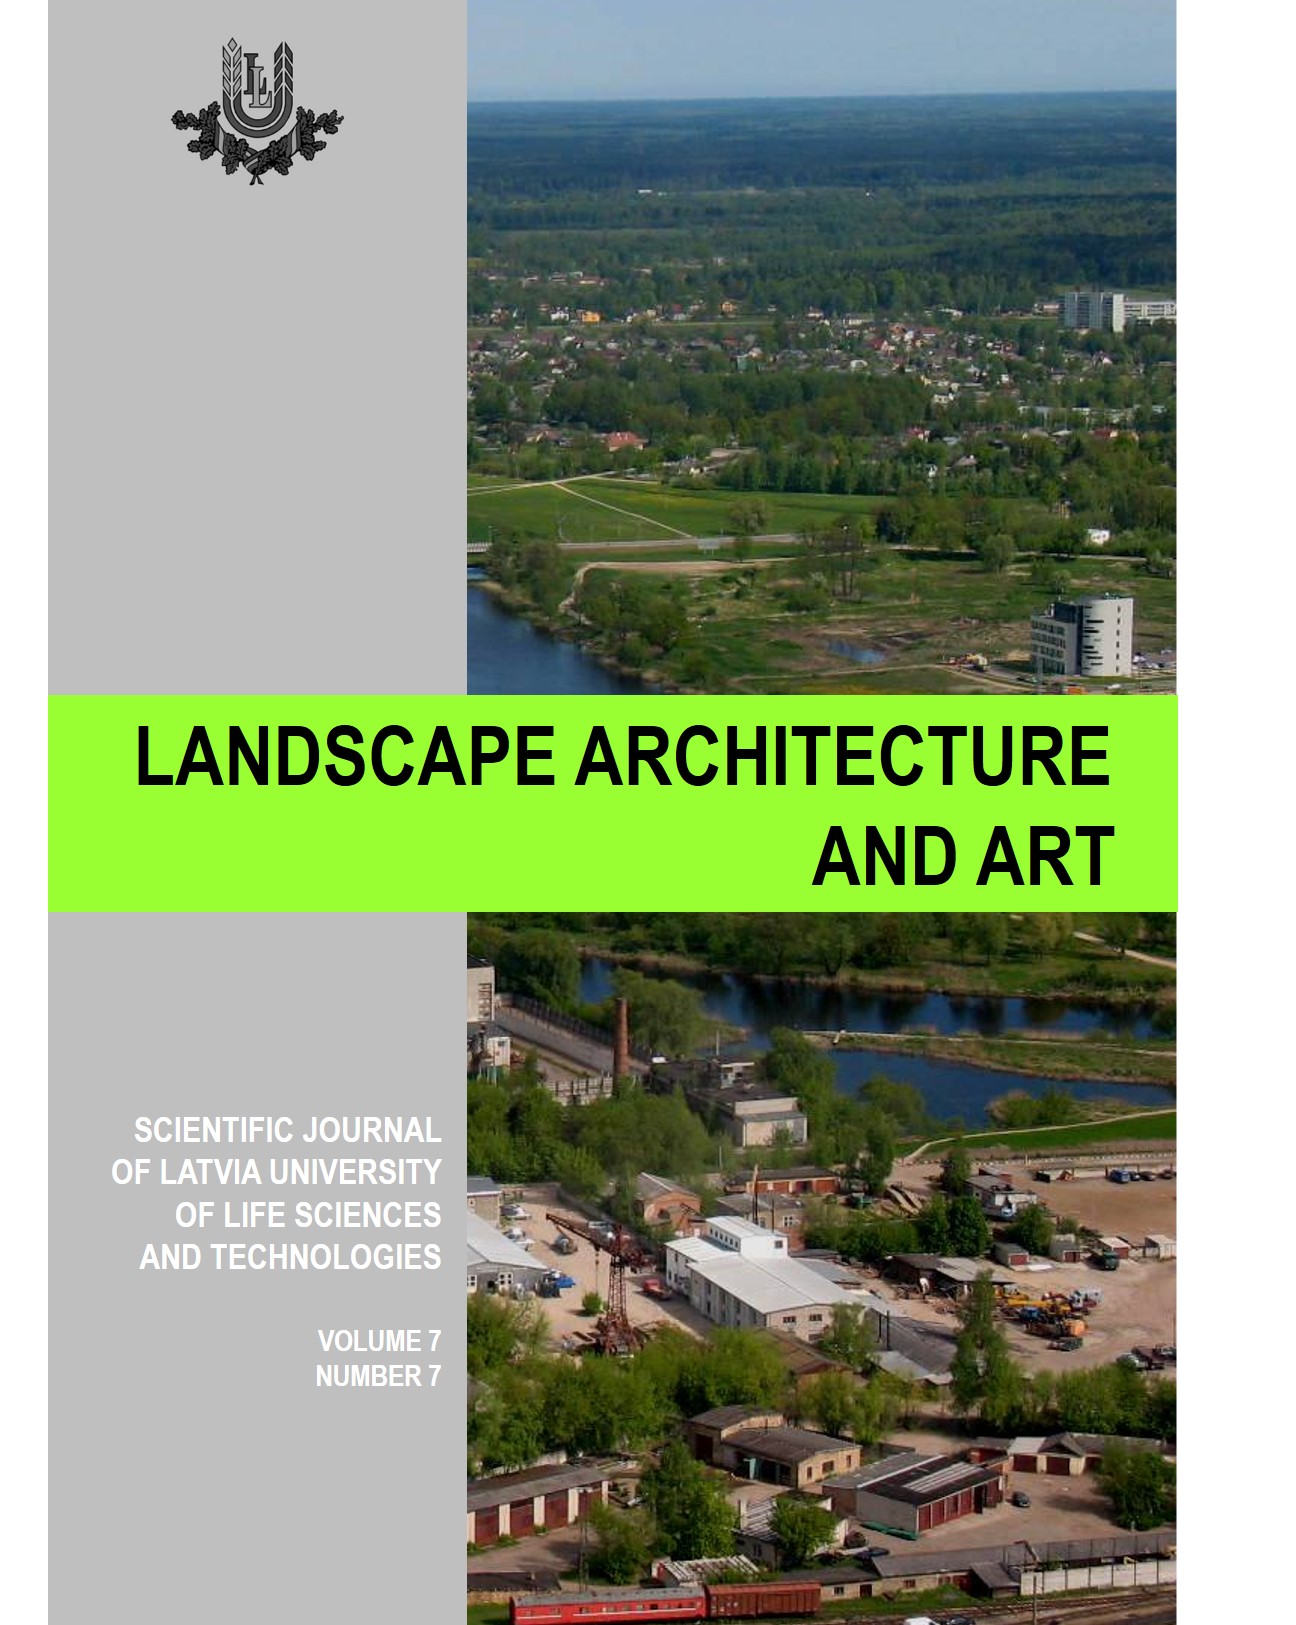 					View Vol. 7 No. 7 (2015): Landscape Architecture and Art, Volume 7, Number 7
				